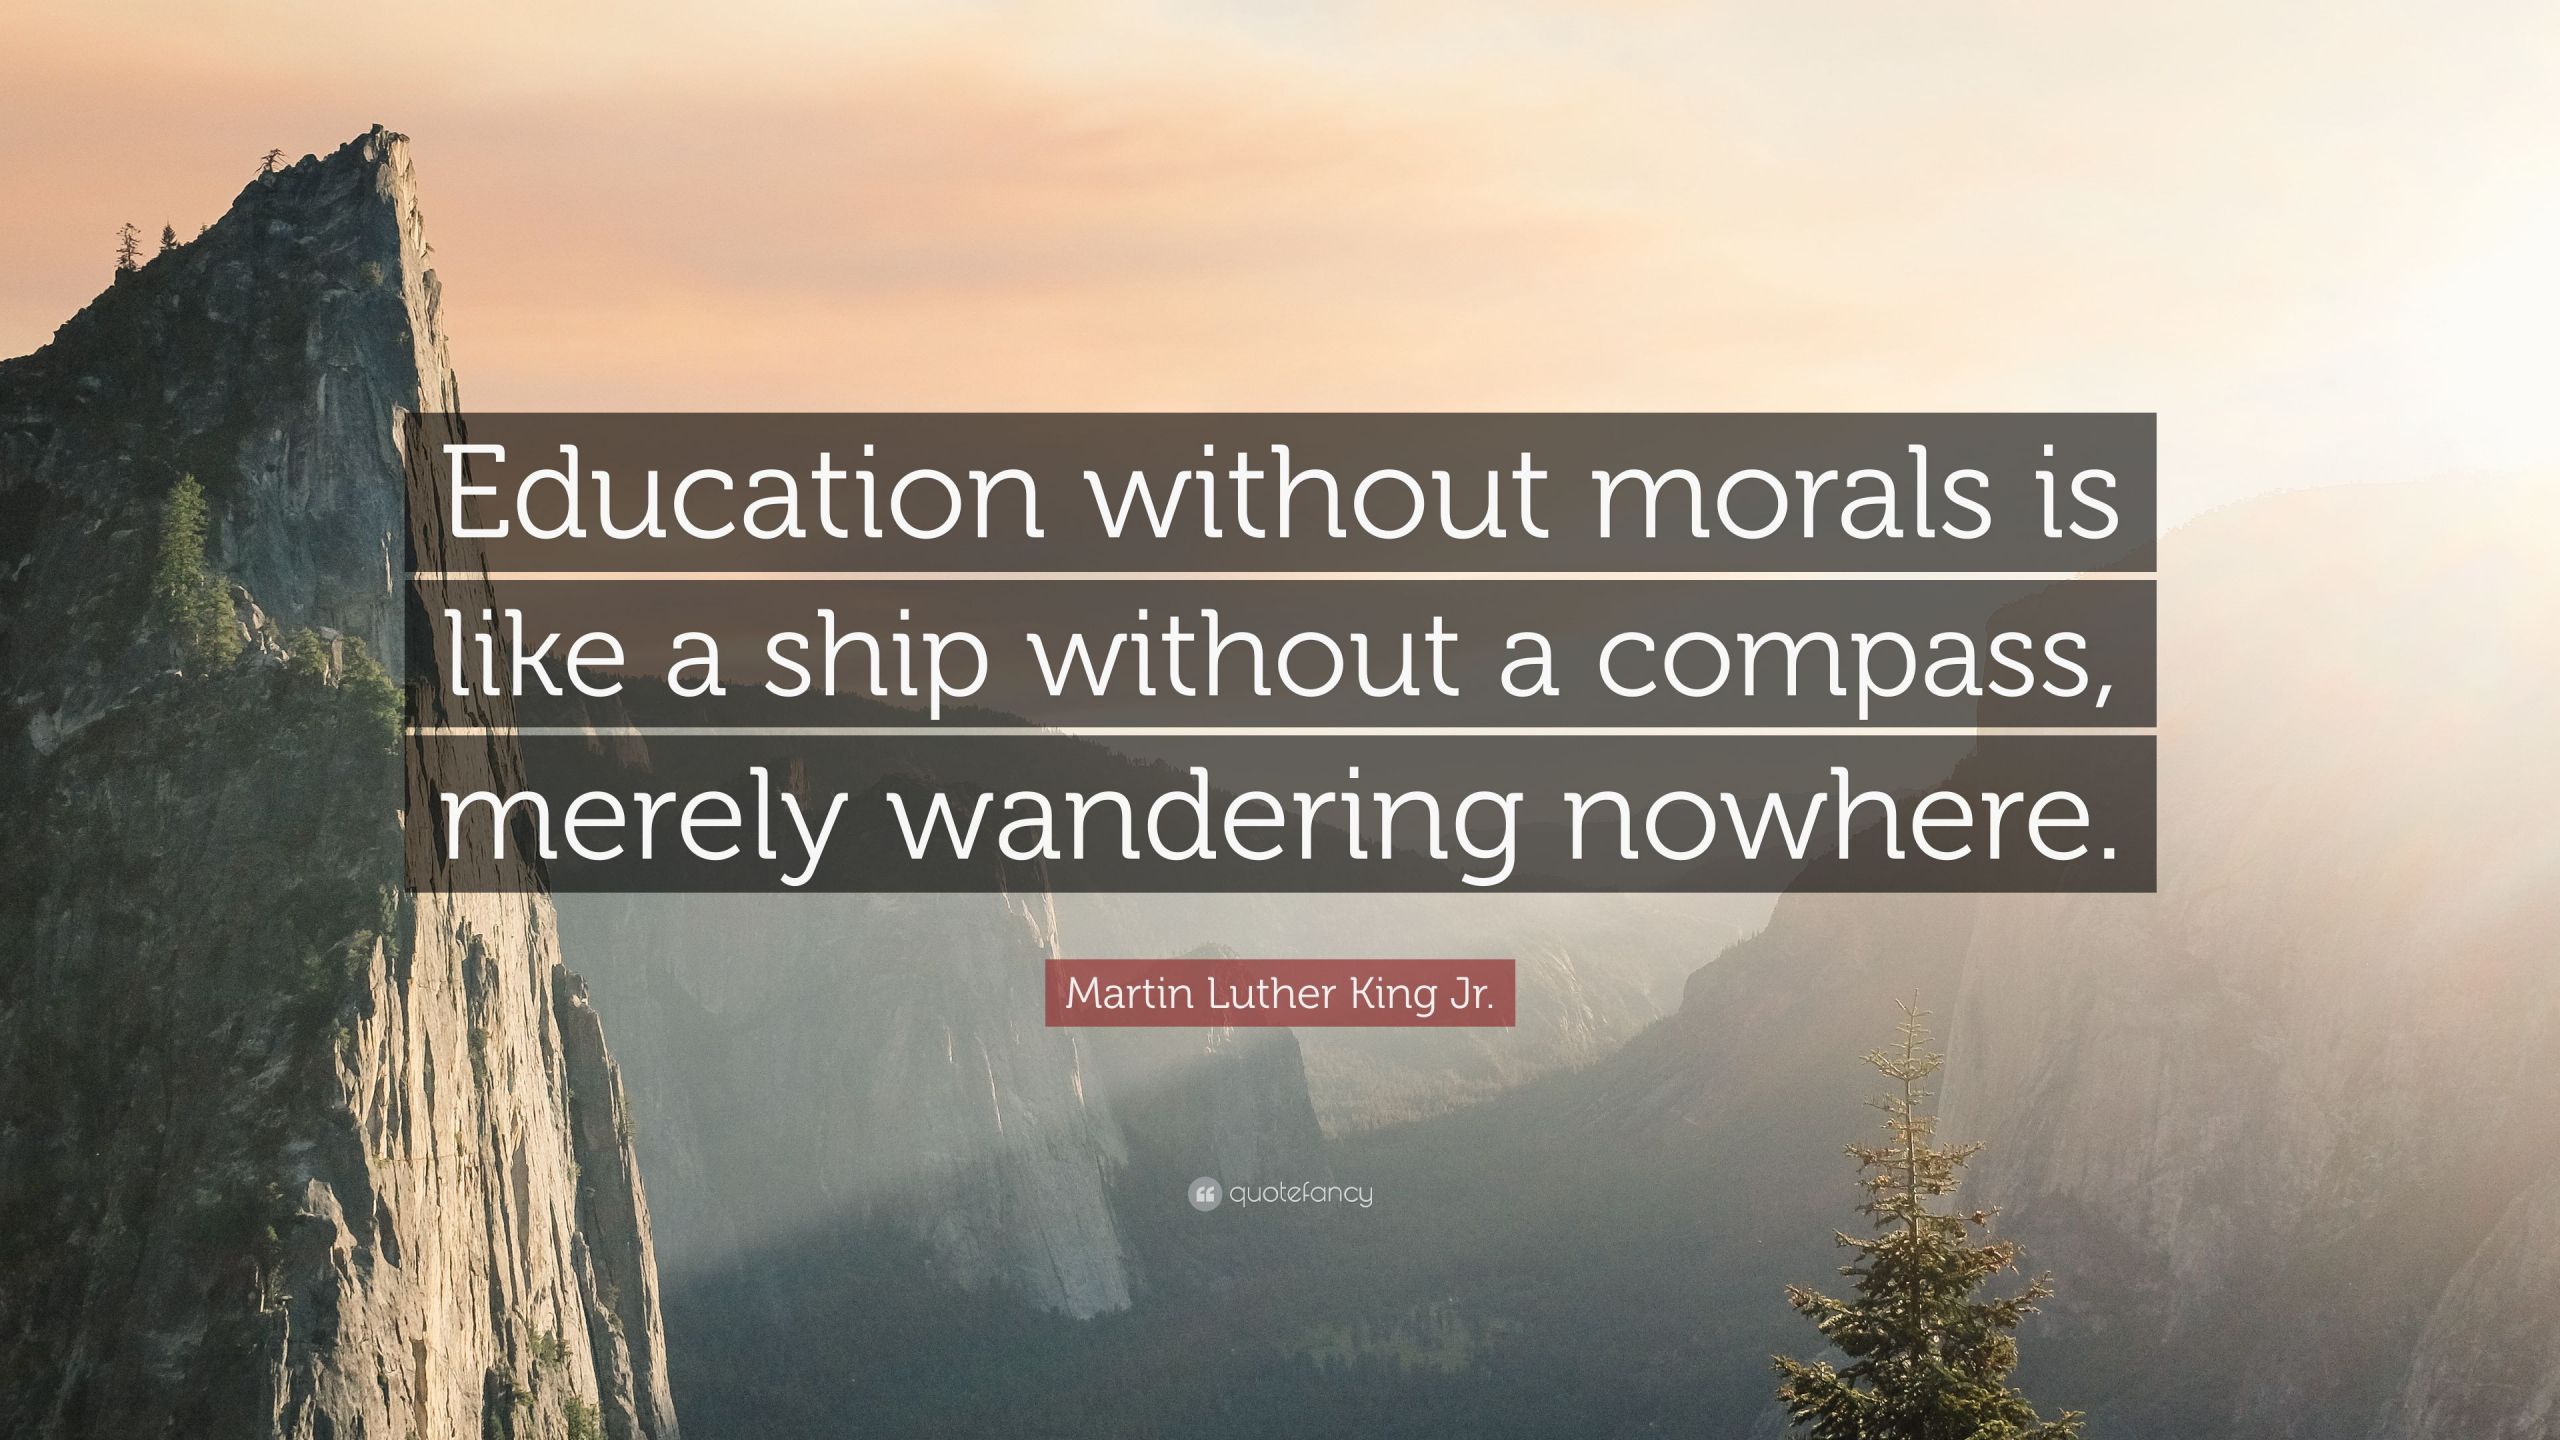 Martin Luther Quotes On Education
 Martin Luther King Jr Quote “Education without morals is